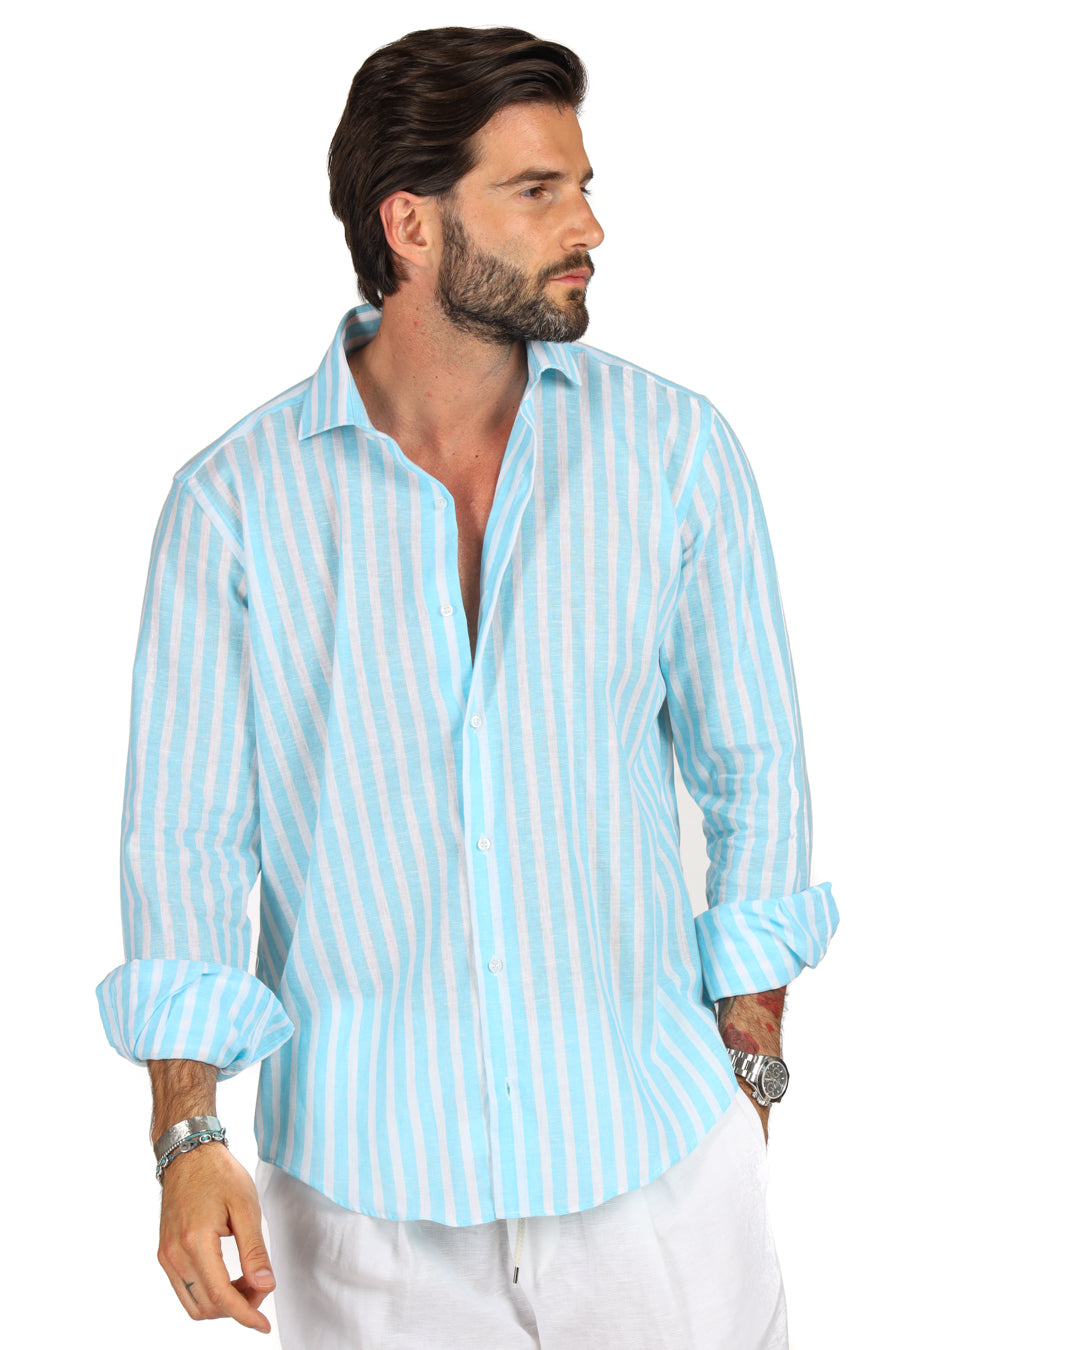 Procida - Classic turquoise wide striped linen shirt